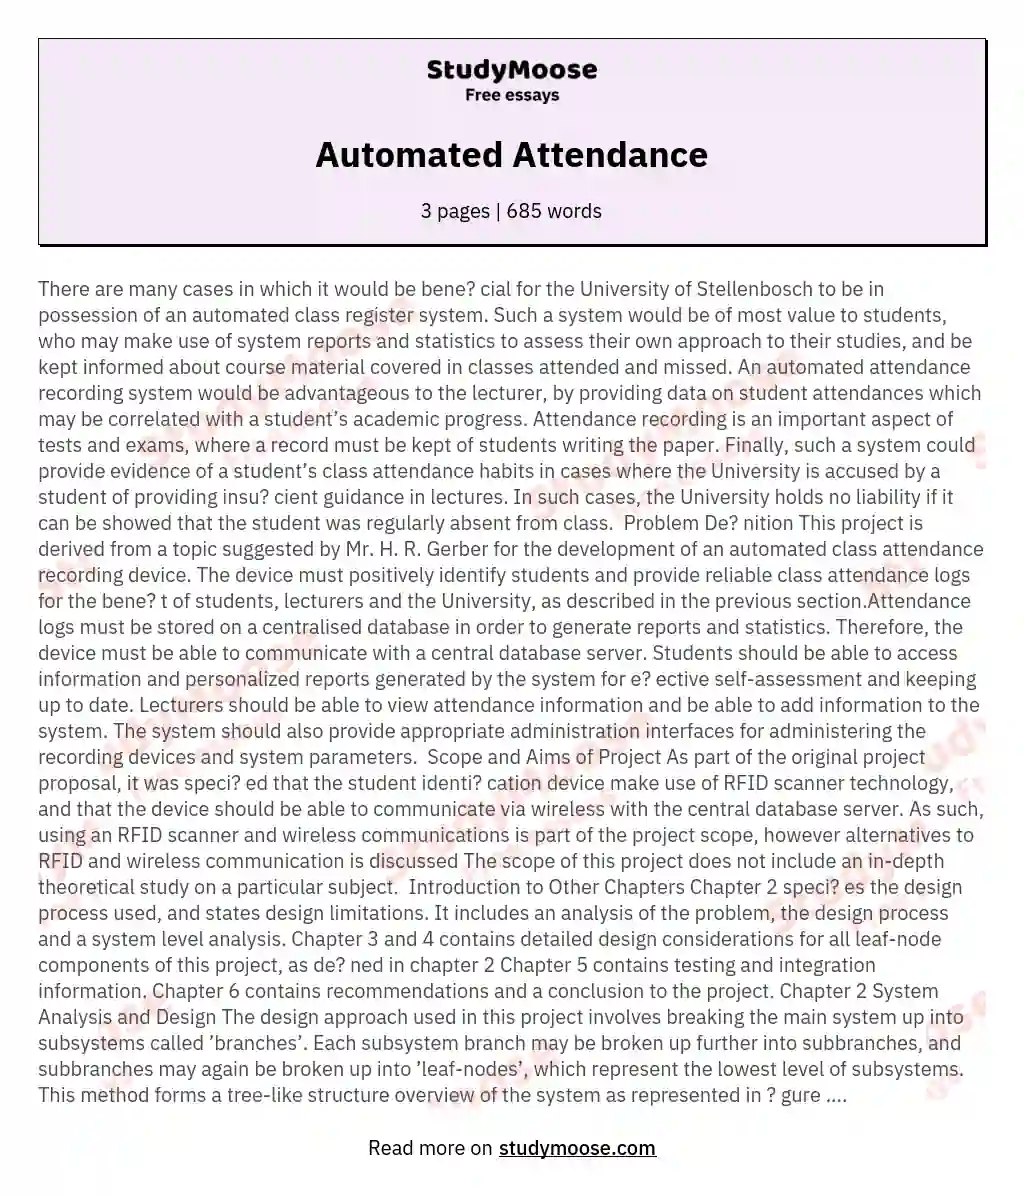 Automated Attendance essay